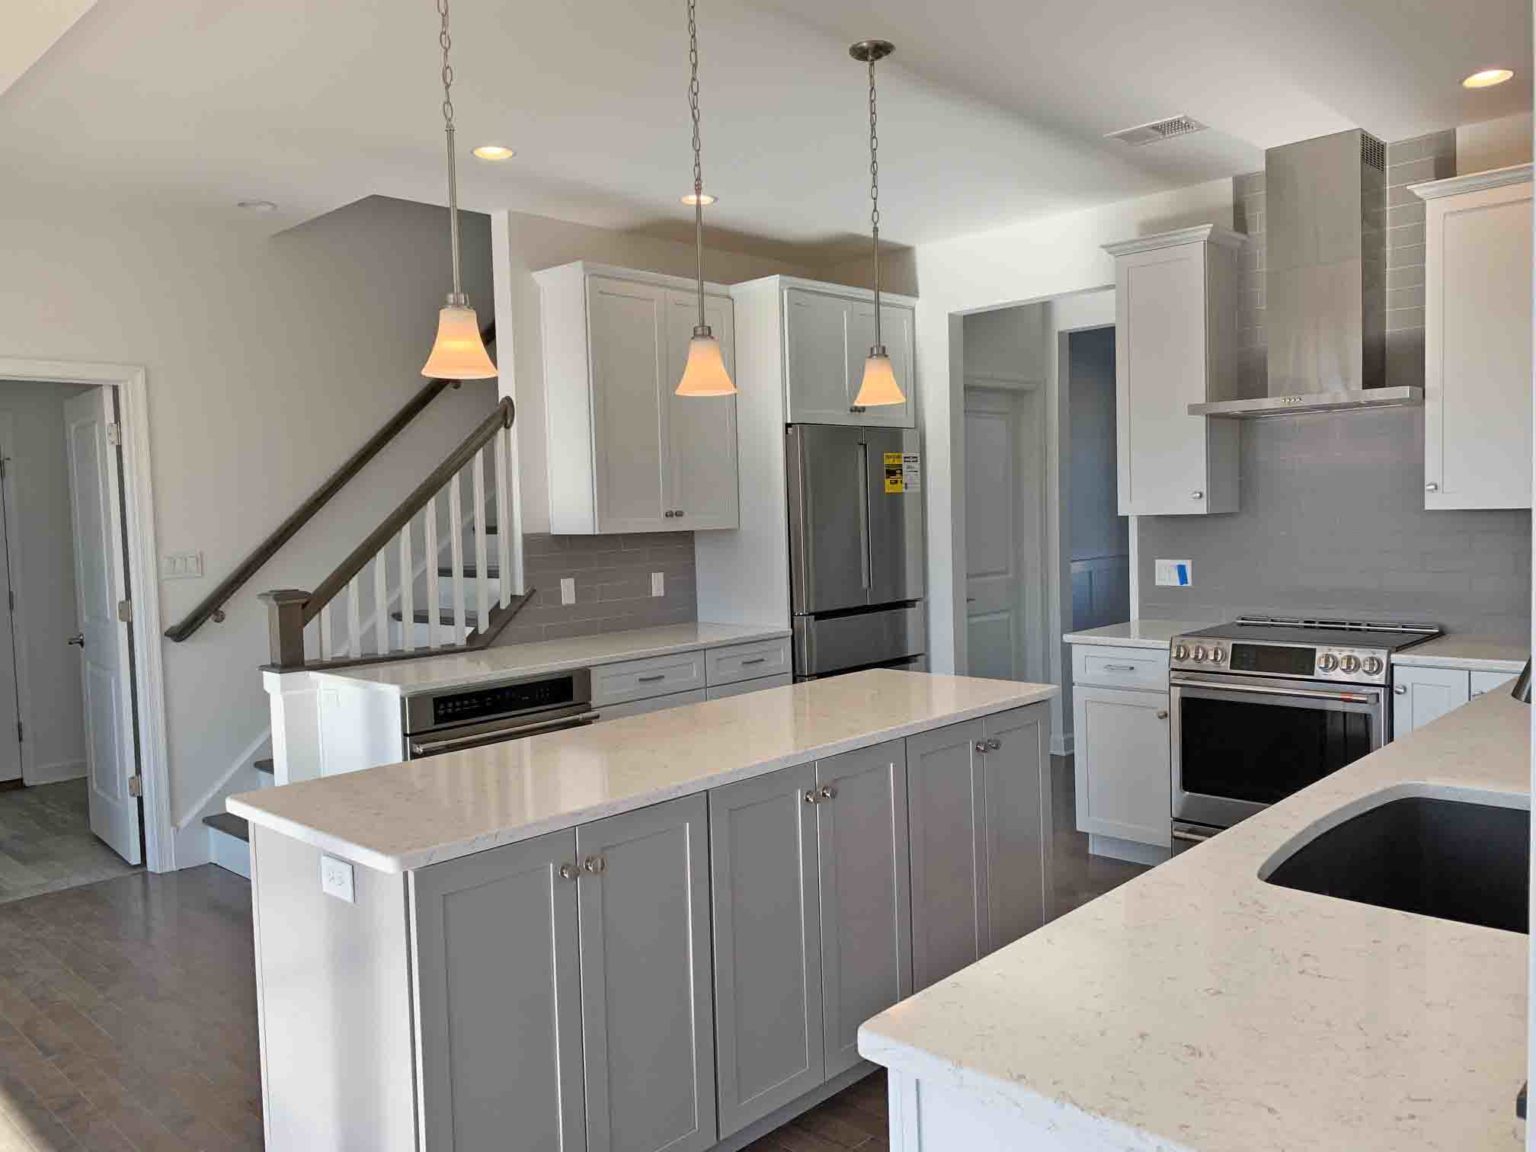 Choosing The Right Kitchen Countertops, Morrisburg Kitchen Cabinet And Countertops